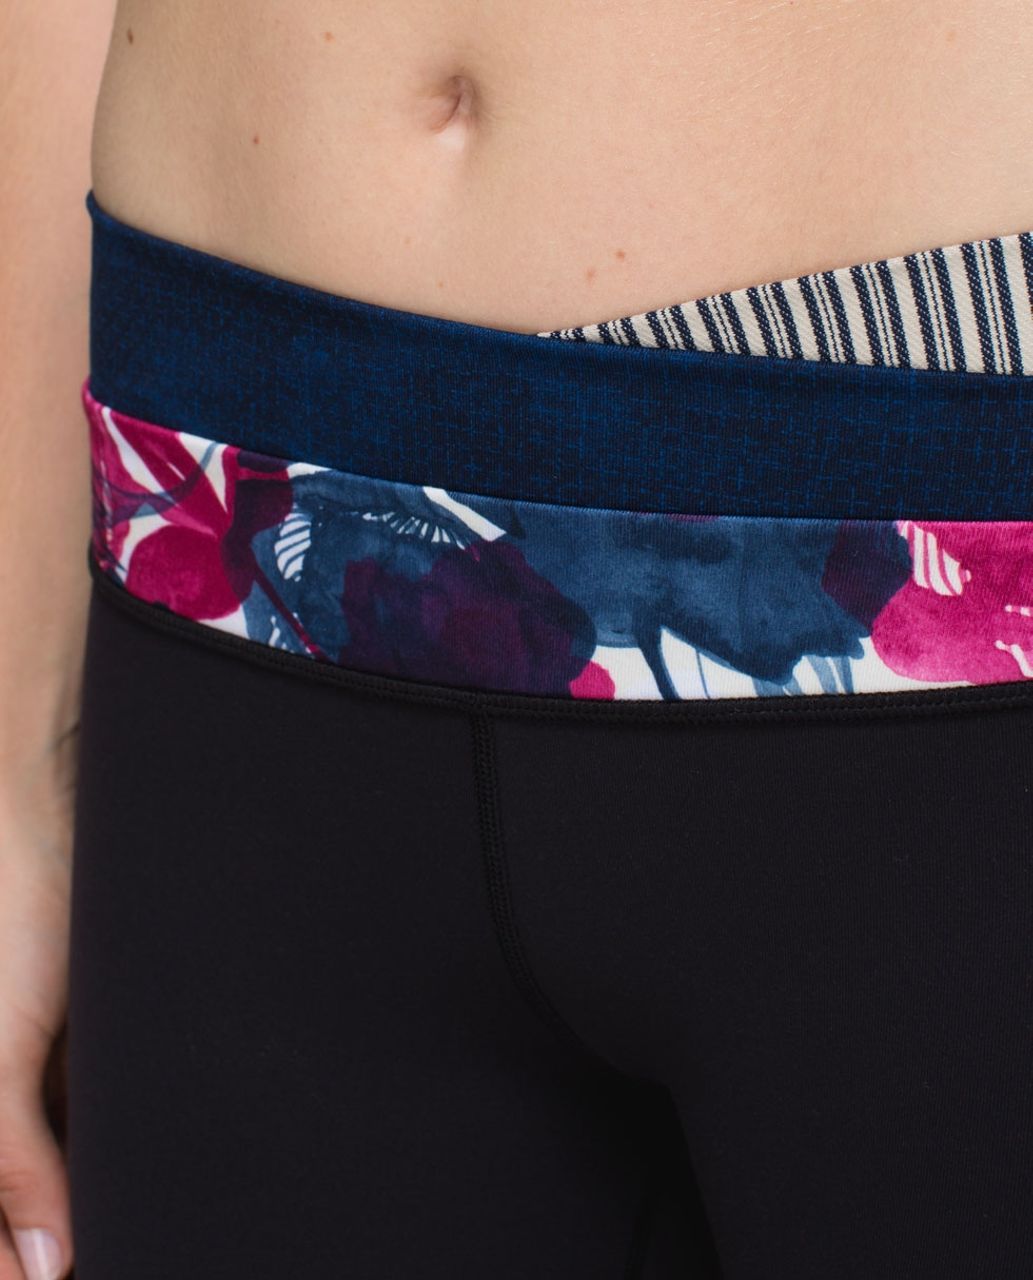 Lululemon Astro Wunder Under Crop II - Black / Sashico Cross Inkwell Rugged Blue / Inky Floral Ghost Inkwell Bumble Berry